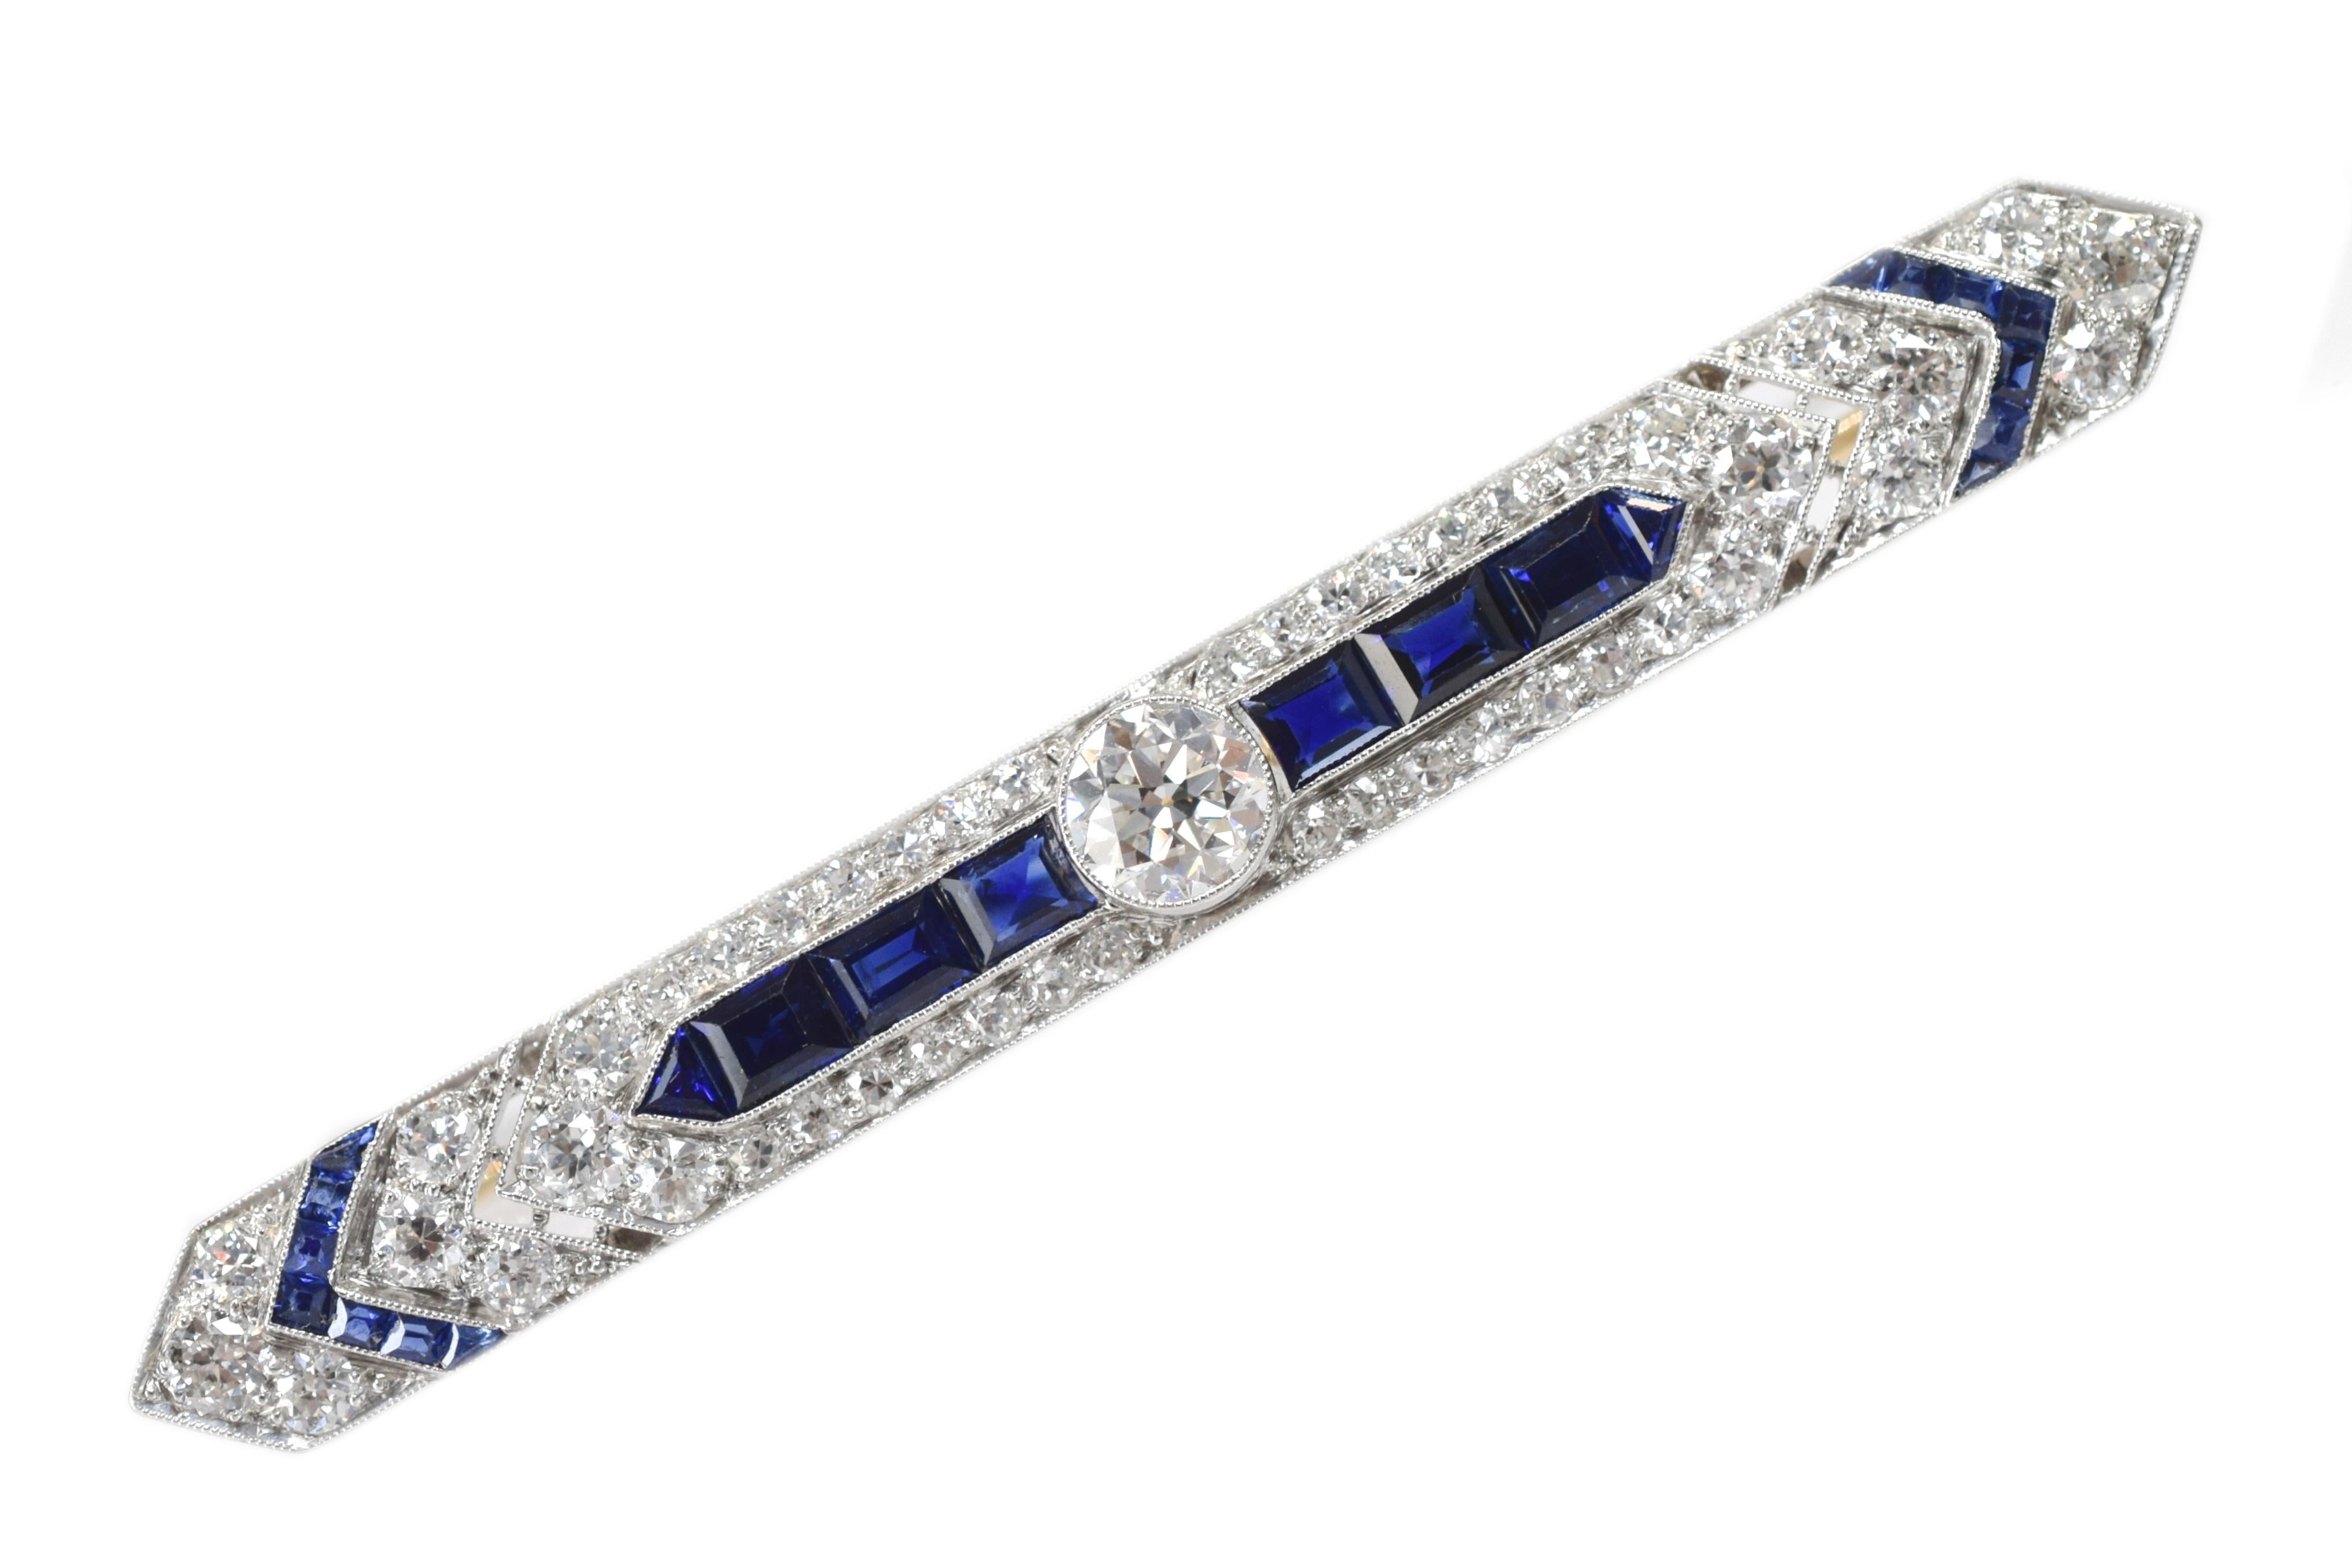 Art Deco Brooch! with millgrain accents,  the brooch has an impressive 1.0 carat Old European diamond in the center, 46 round-cut diamonds with an approximate total weight of 2.0 carats and 22 calibre-cut sapphires with an approximate total weight